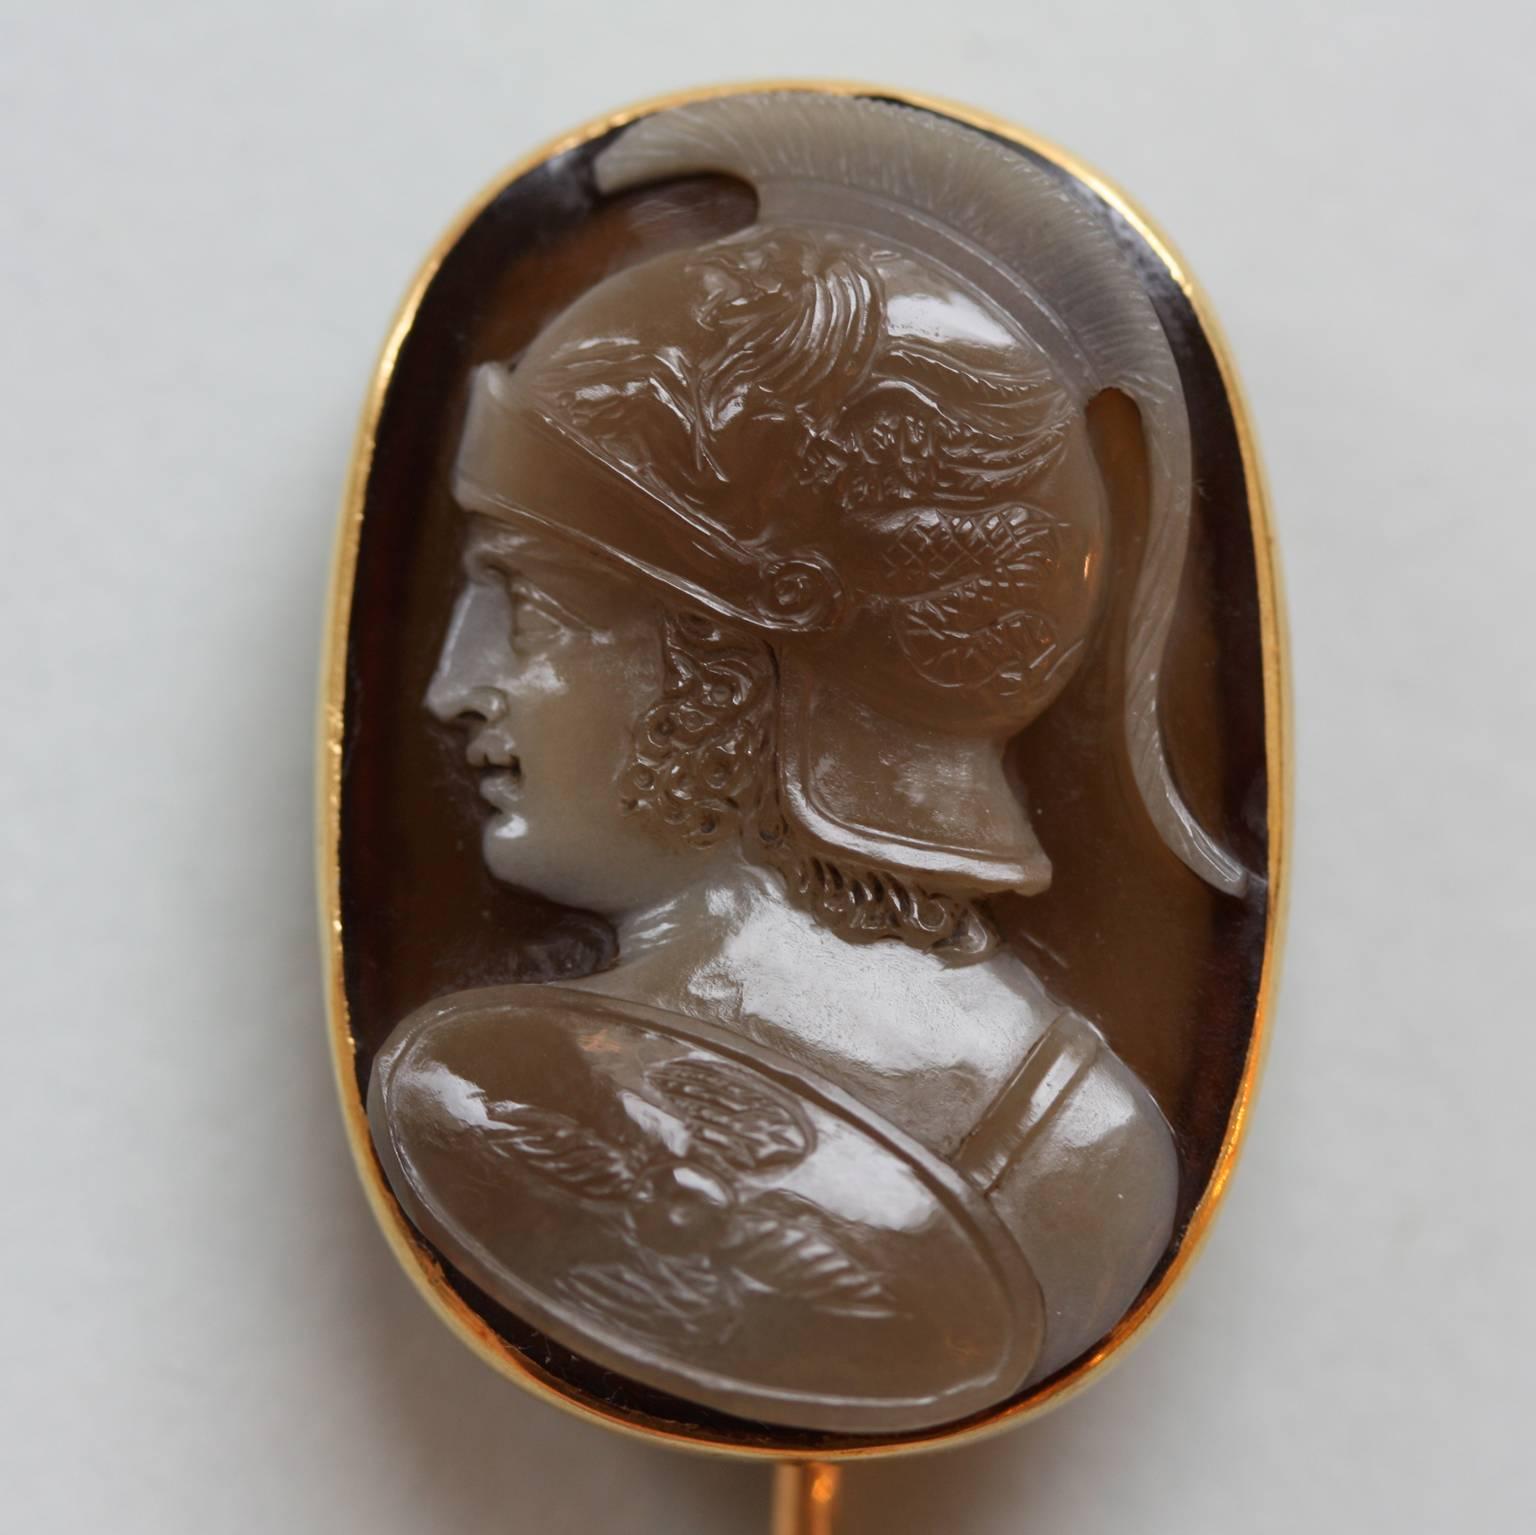 An 18 carat gold (stick)pin with an agate cameo representing Mars or Ares, god of war, son of Hera and Zeus, lover of Aphrodite, master mark: IM with a lyre in between, the cameo is numbered 91, France, 19th century.

weight: 7 gram
length pin: